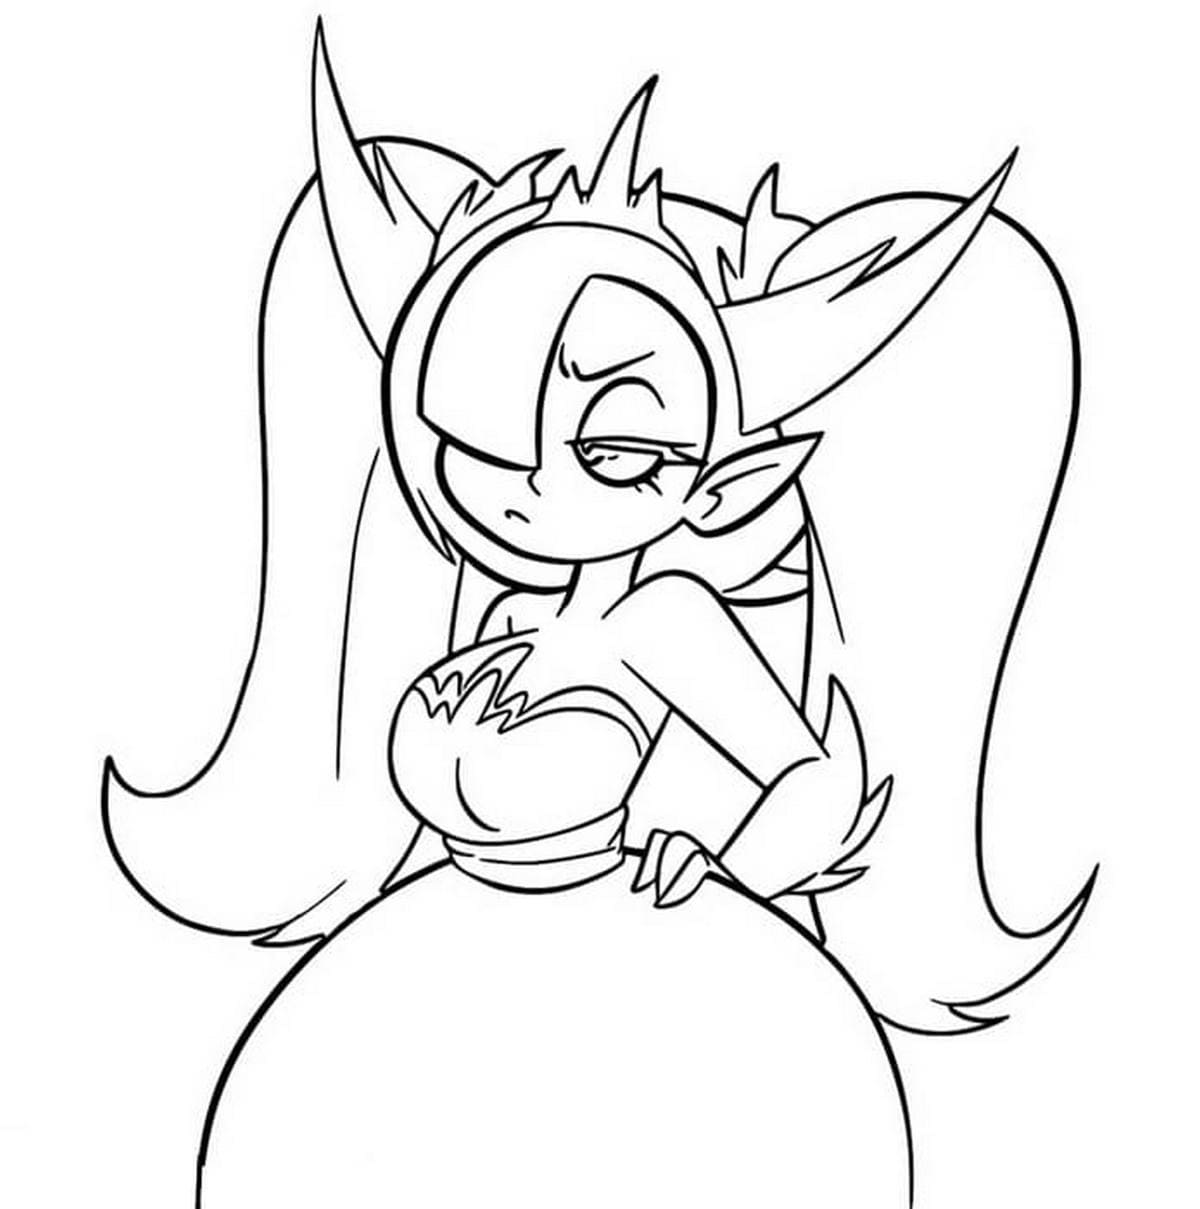 Hekapoo Coloring Page